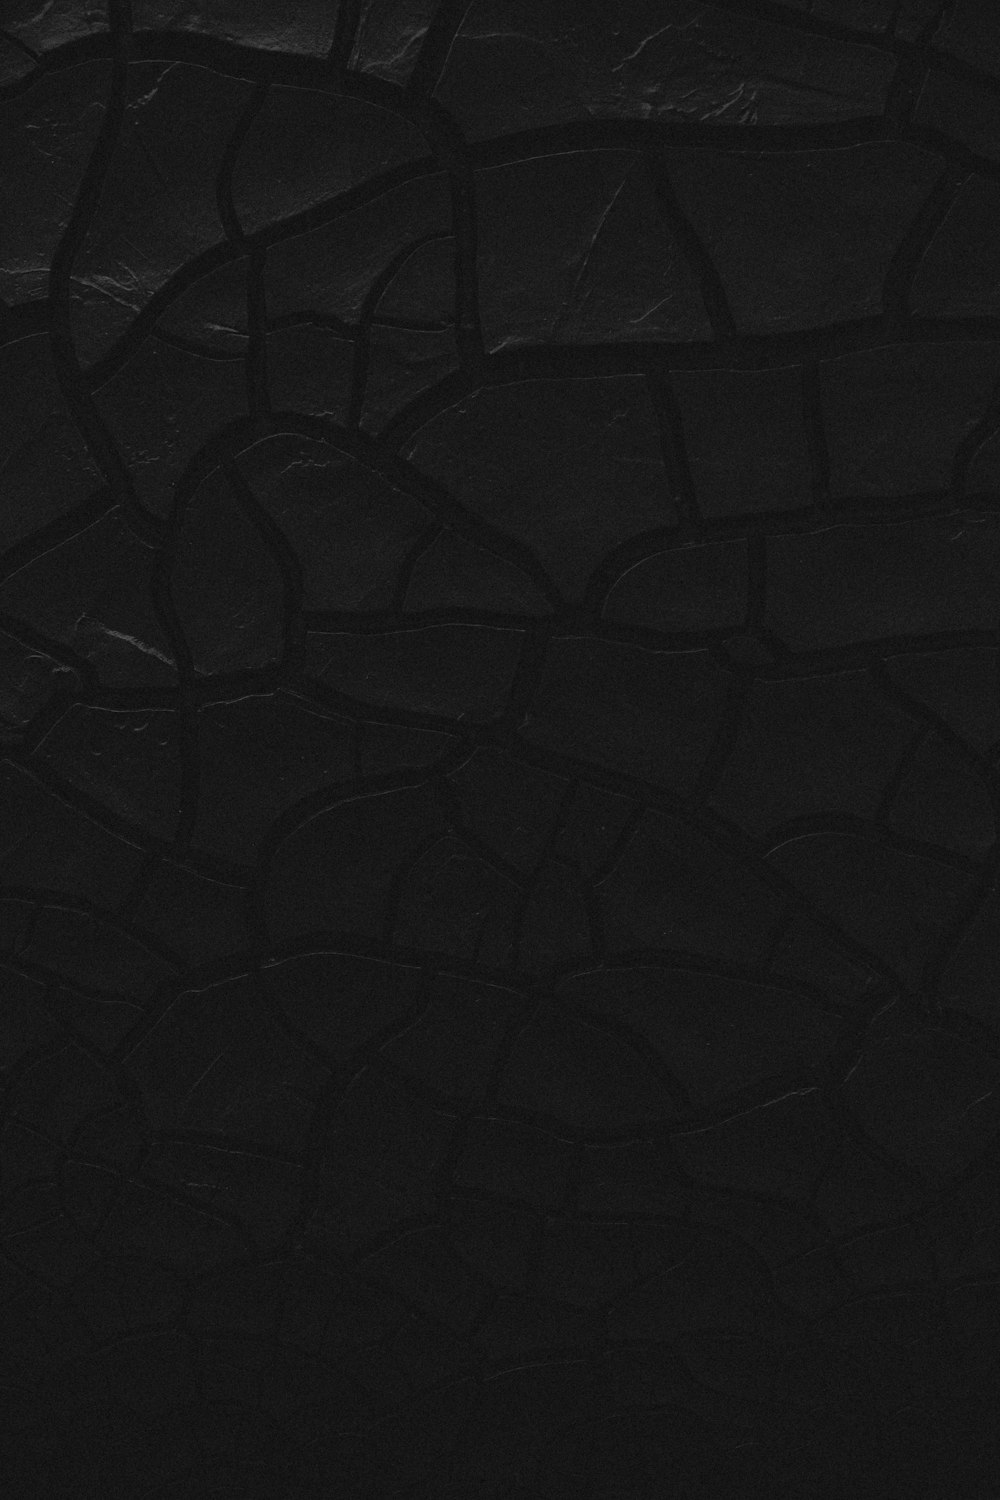 black and gray textile in close up photography